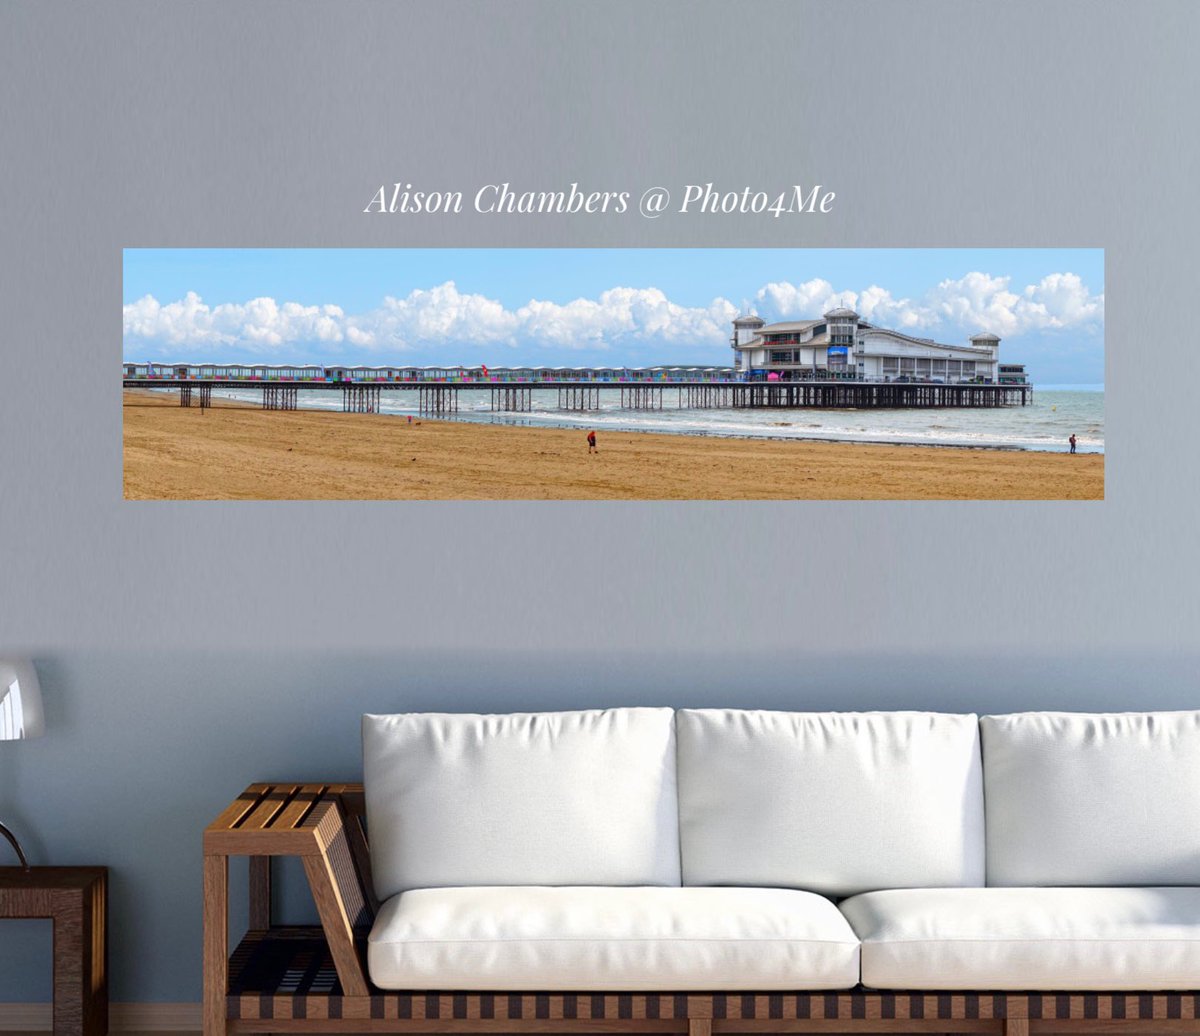 Weston-super-Mare Grand Pier. Available from; shop.Photo4Me.com/1264392 & alisonchambers2.Redbubble.com & 2-alison-chambers.pixels.com #westonsupermare #WestonPier #WestonBeach #WSM #somersetcoast